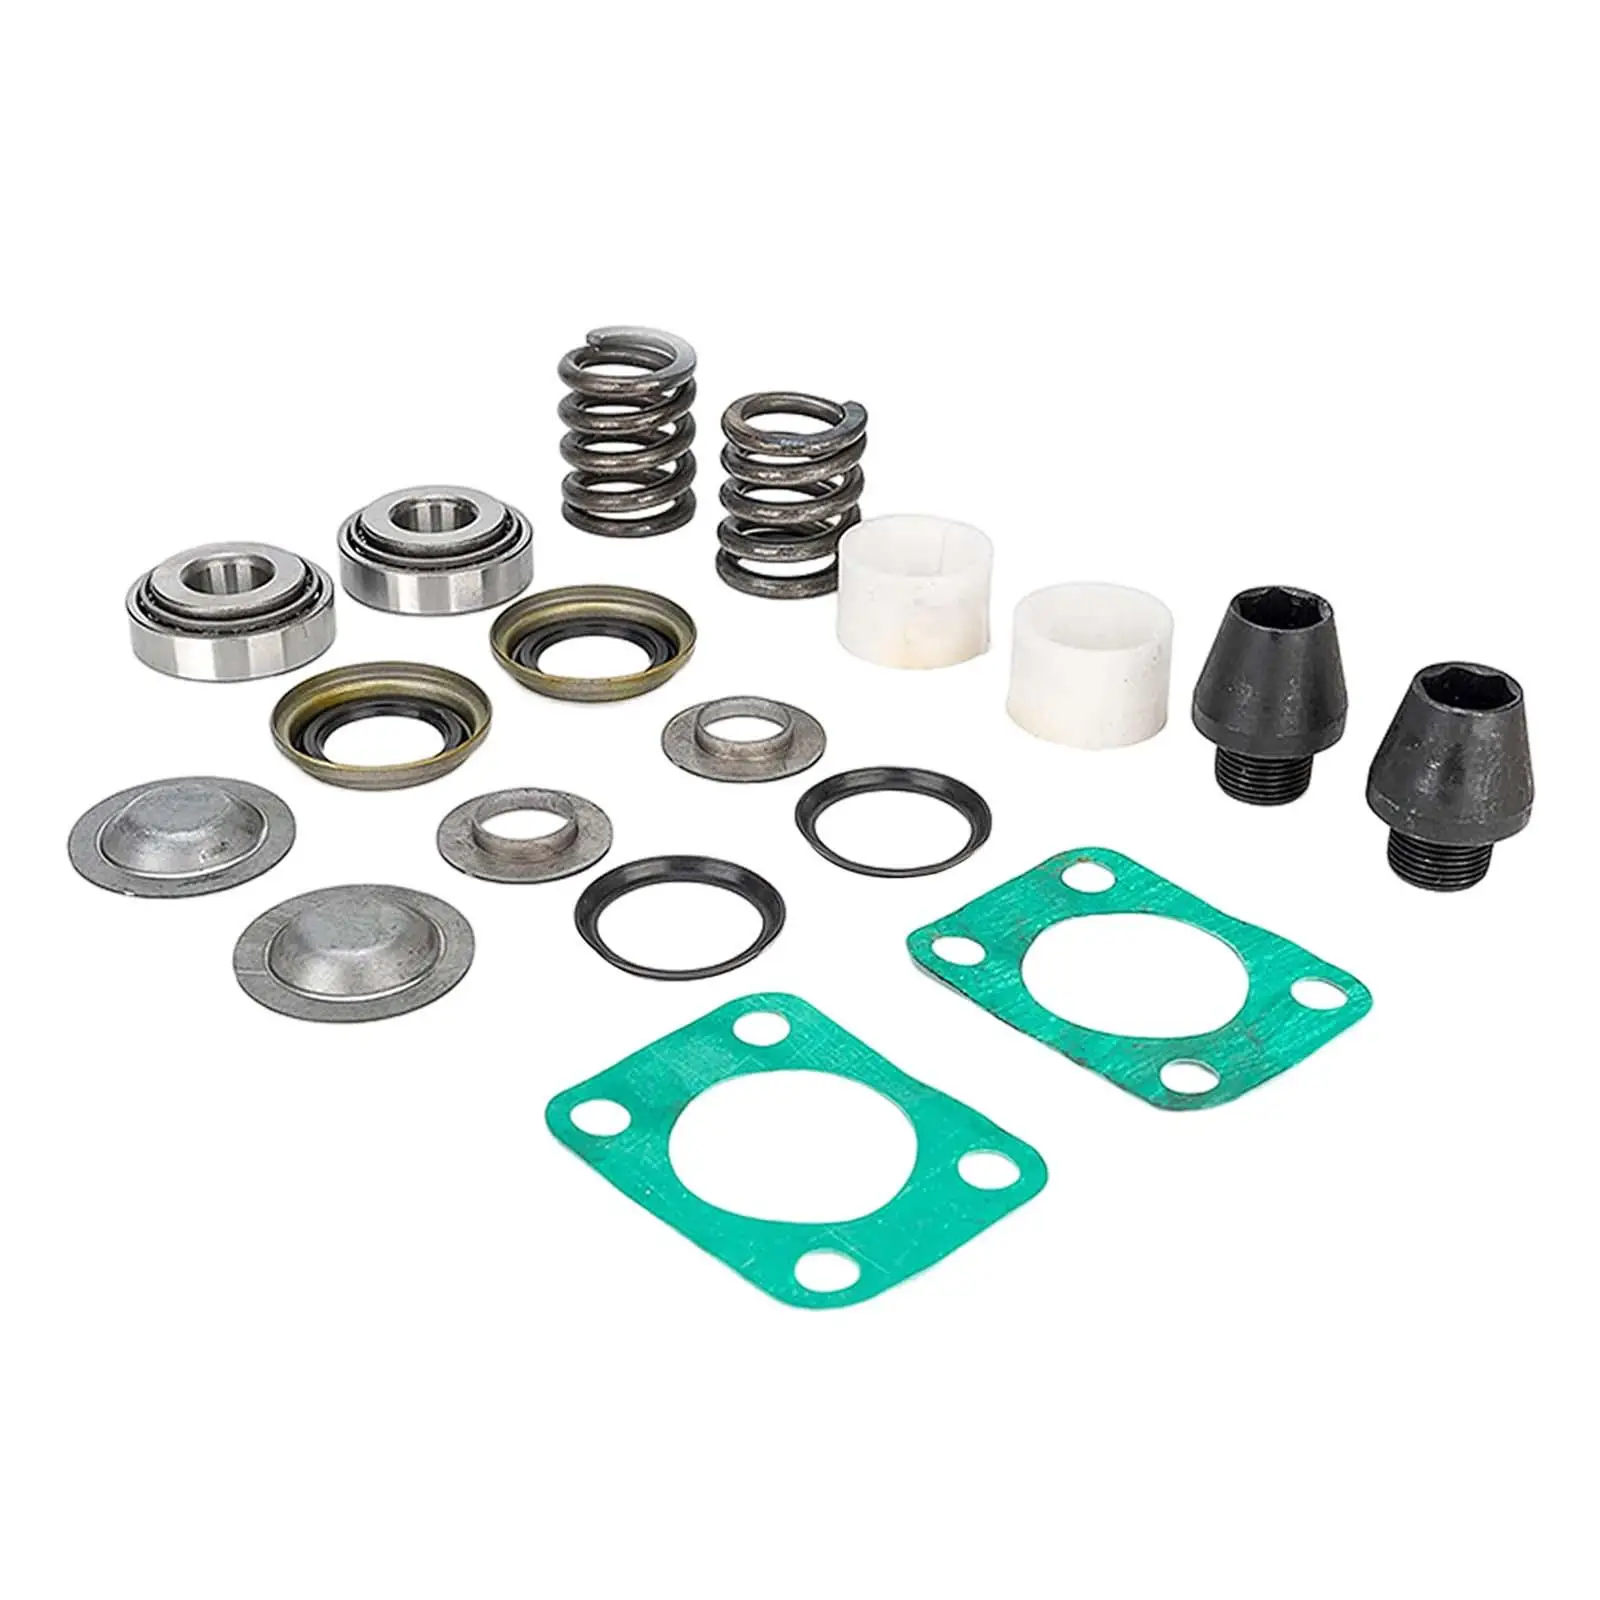 Kingpin Bearing Seal Rebuild Kit 706395x Directly Replace 37307 37300 41886 for Dodge Dana 60 Easy Installation Accessory